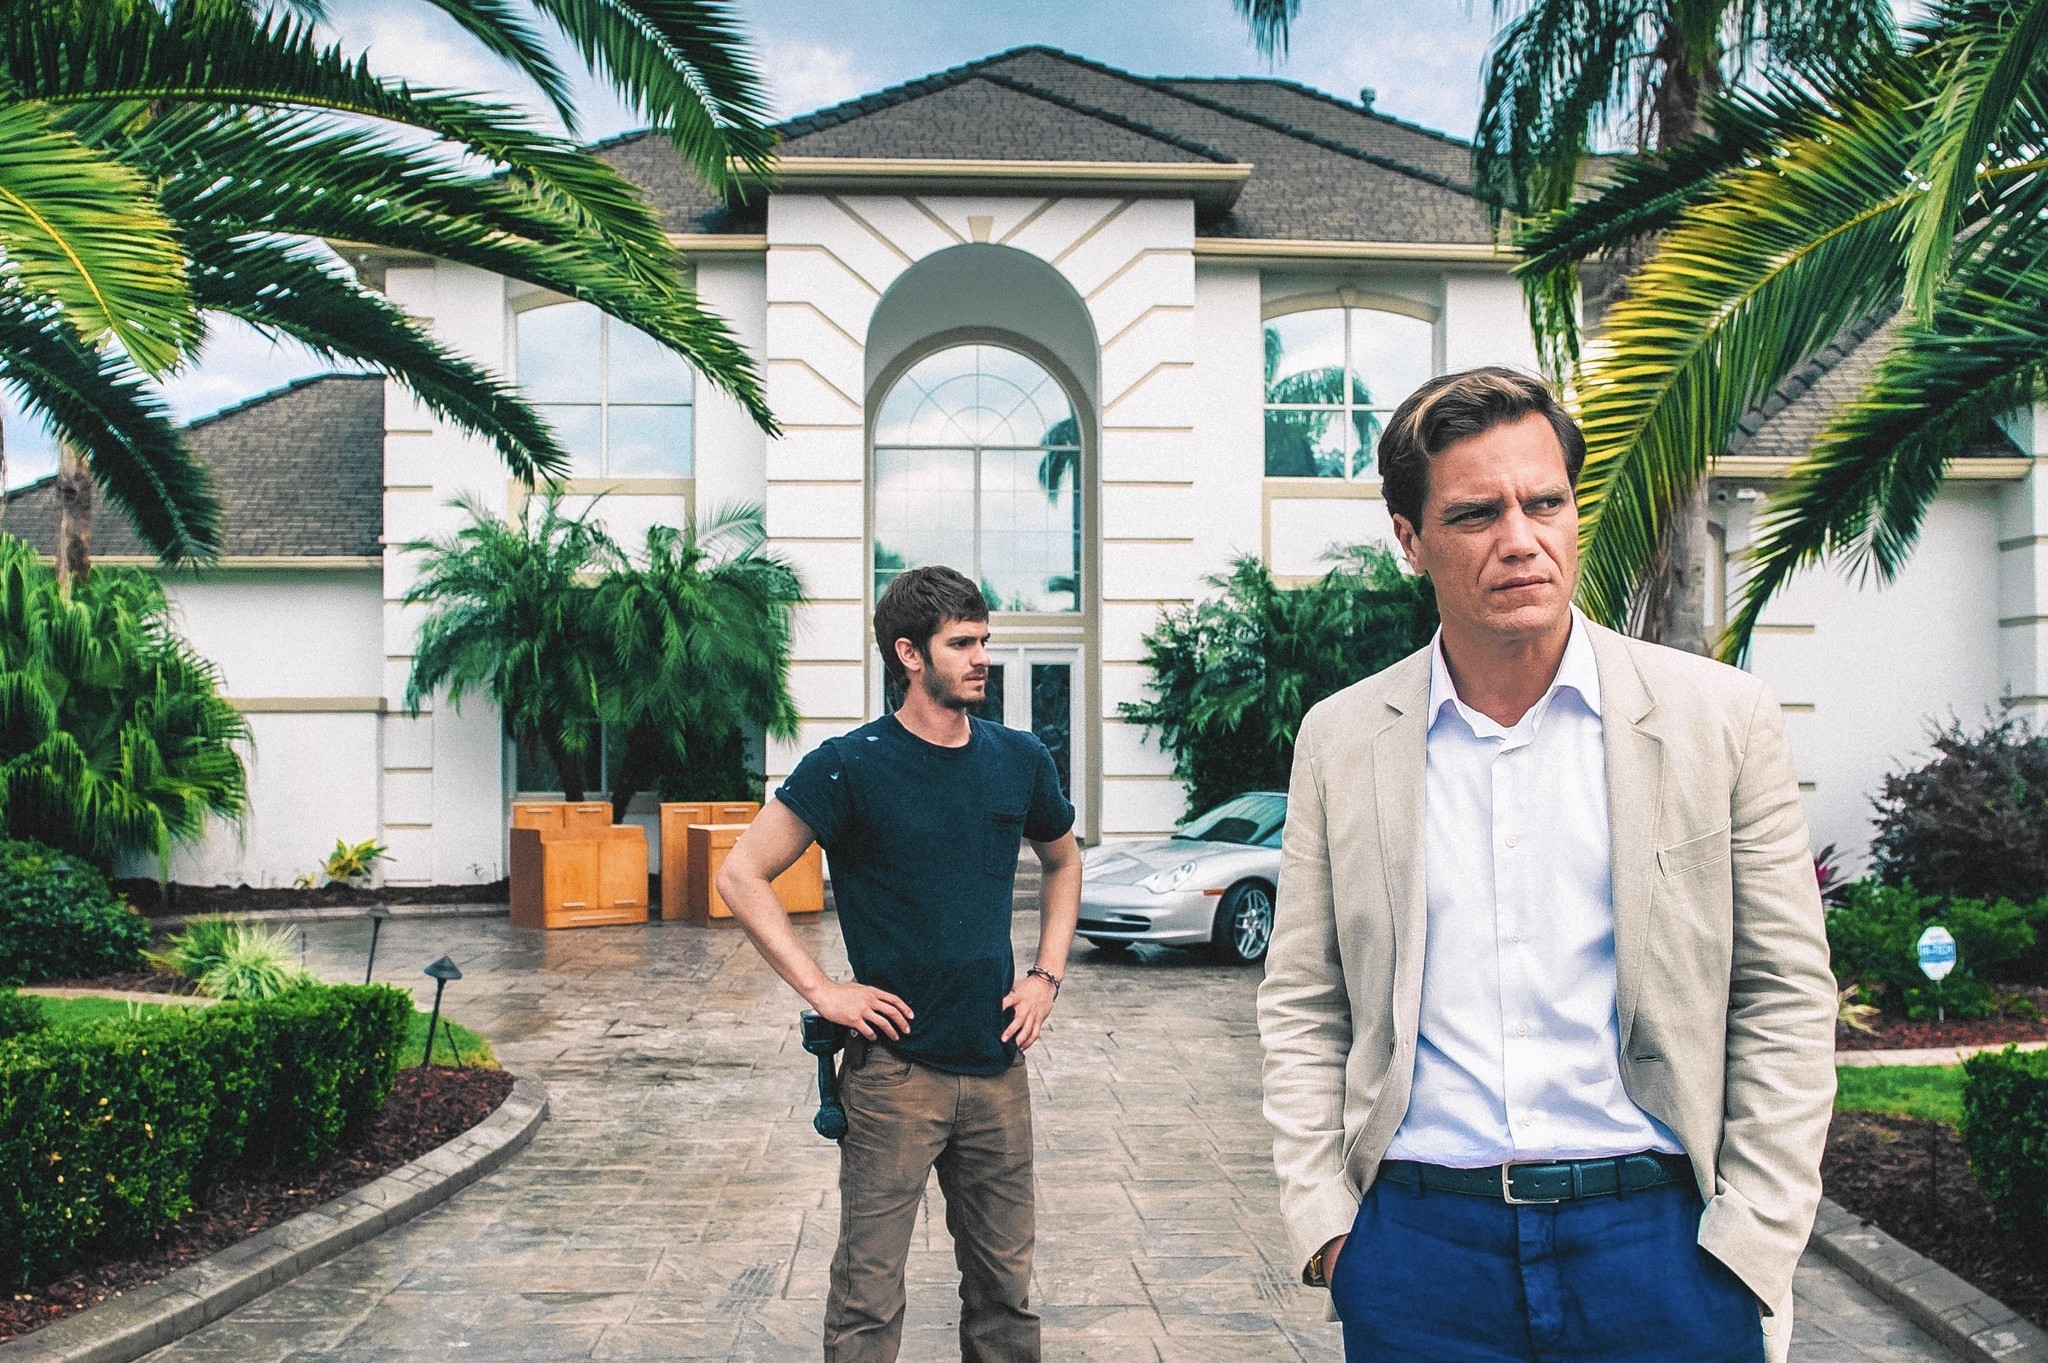 Review: Intense Michael Shannon puts dramatic human face on foreclosure crisis in ‘99 Homes’